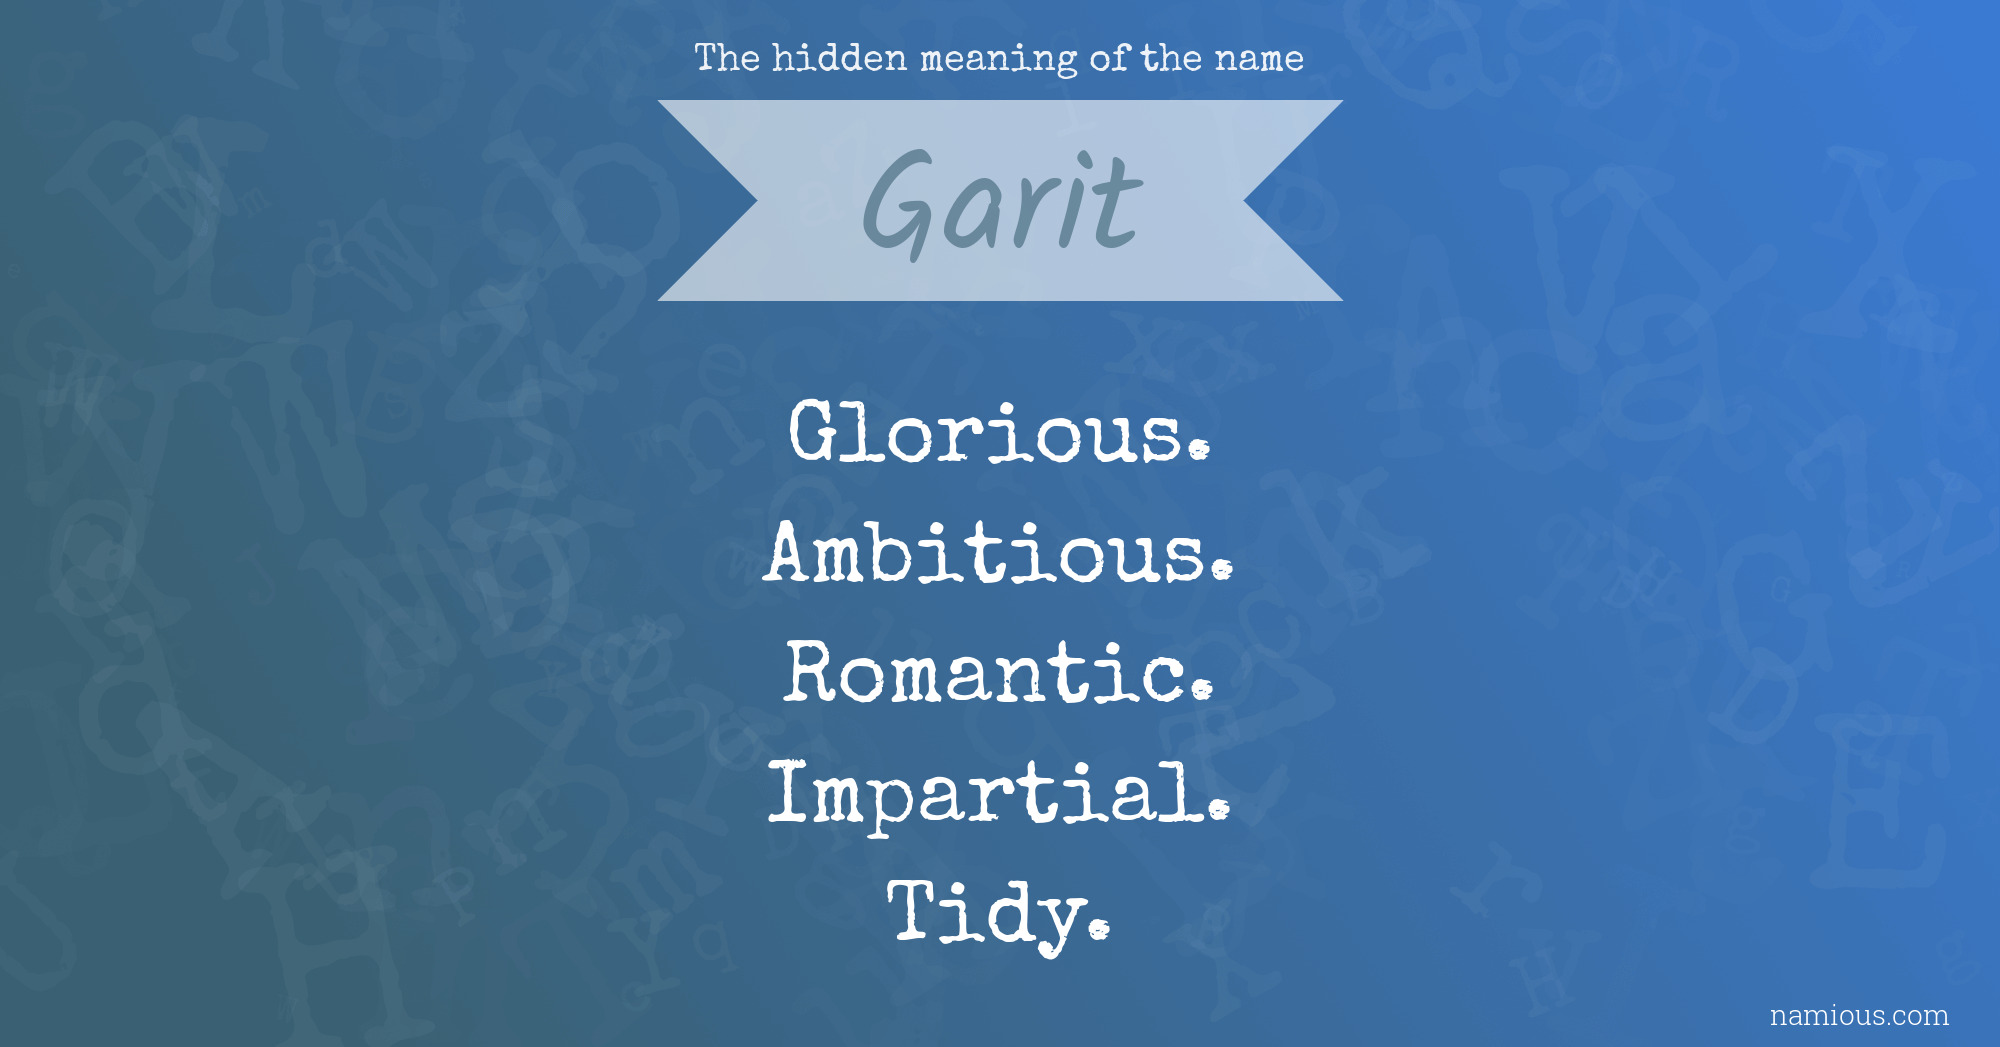 The hidden meaning of the name Garit